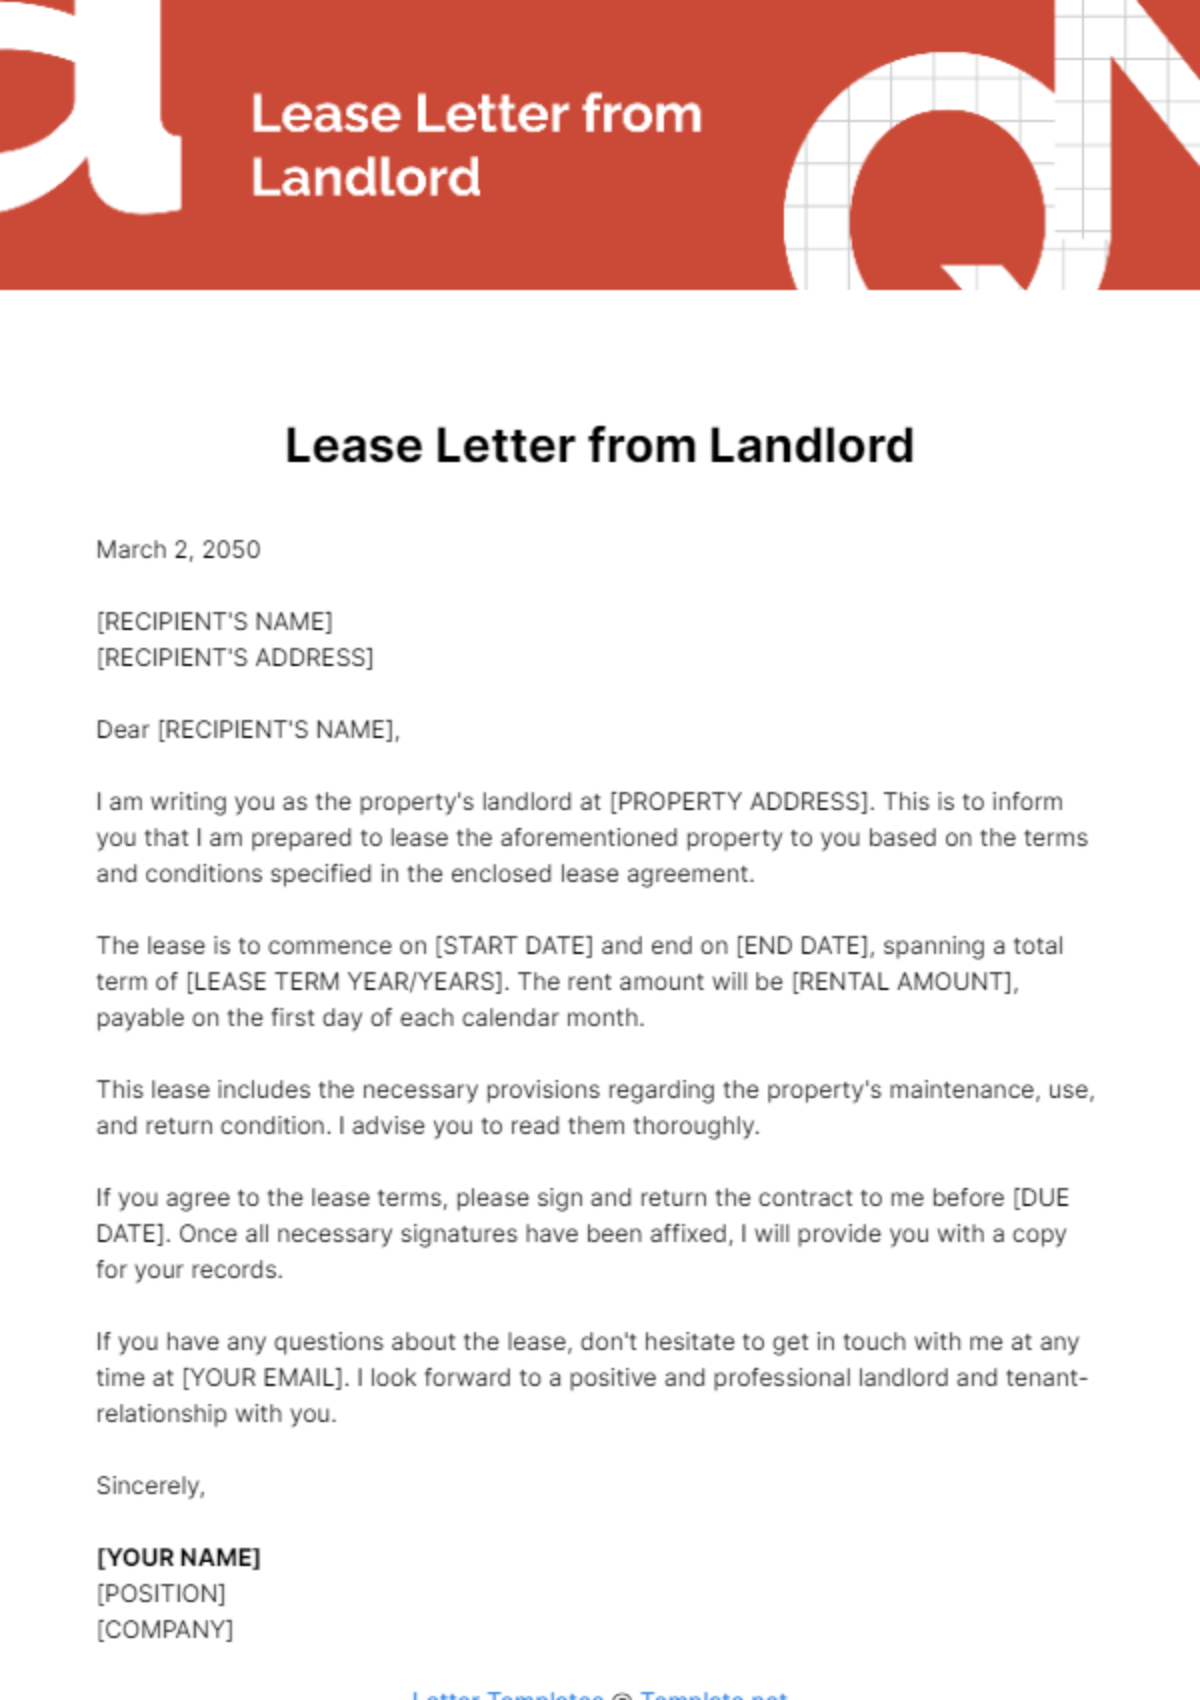 Free Lease Letter from Landlord Template